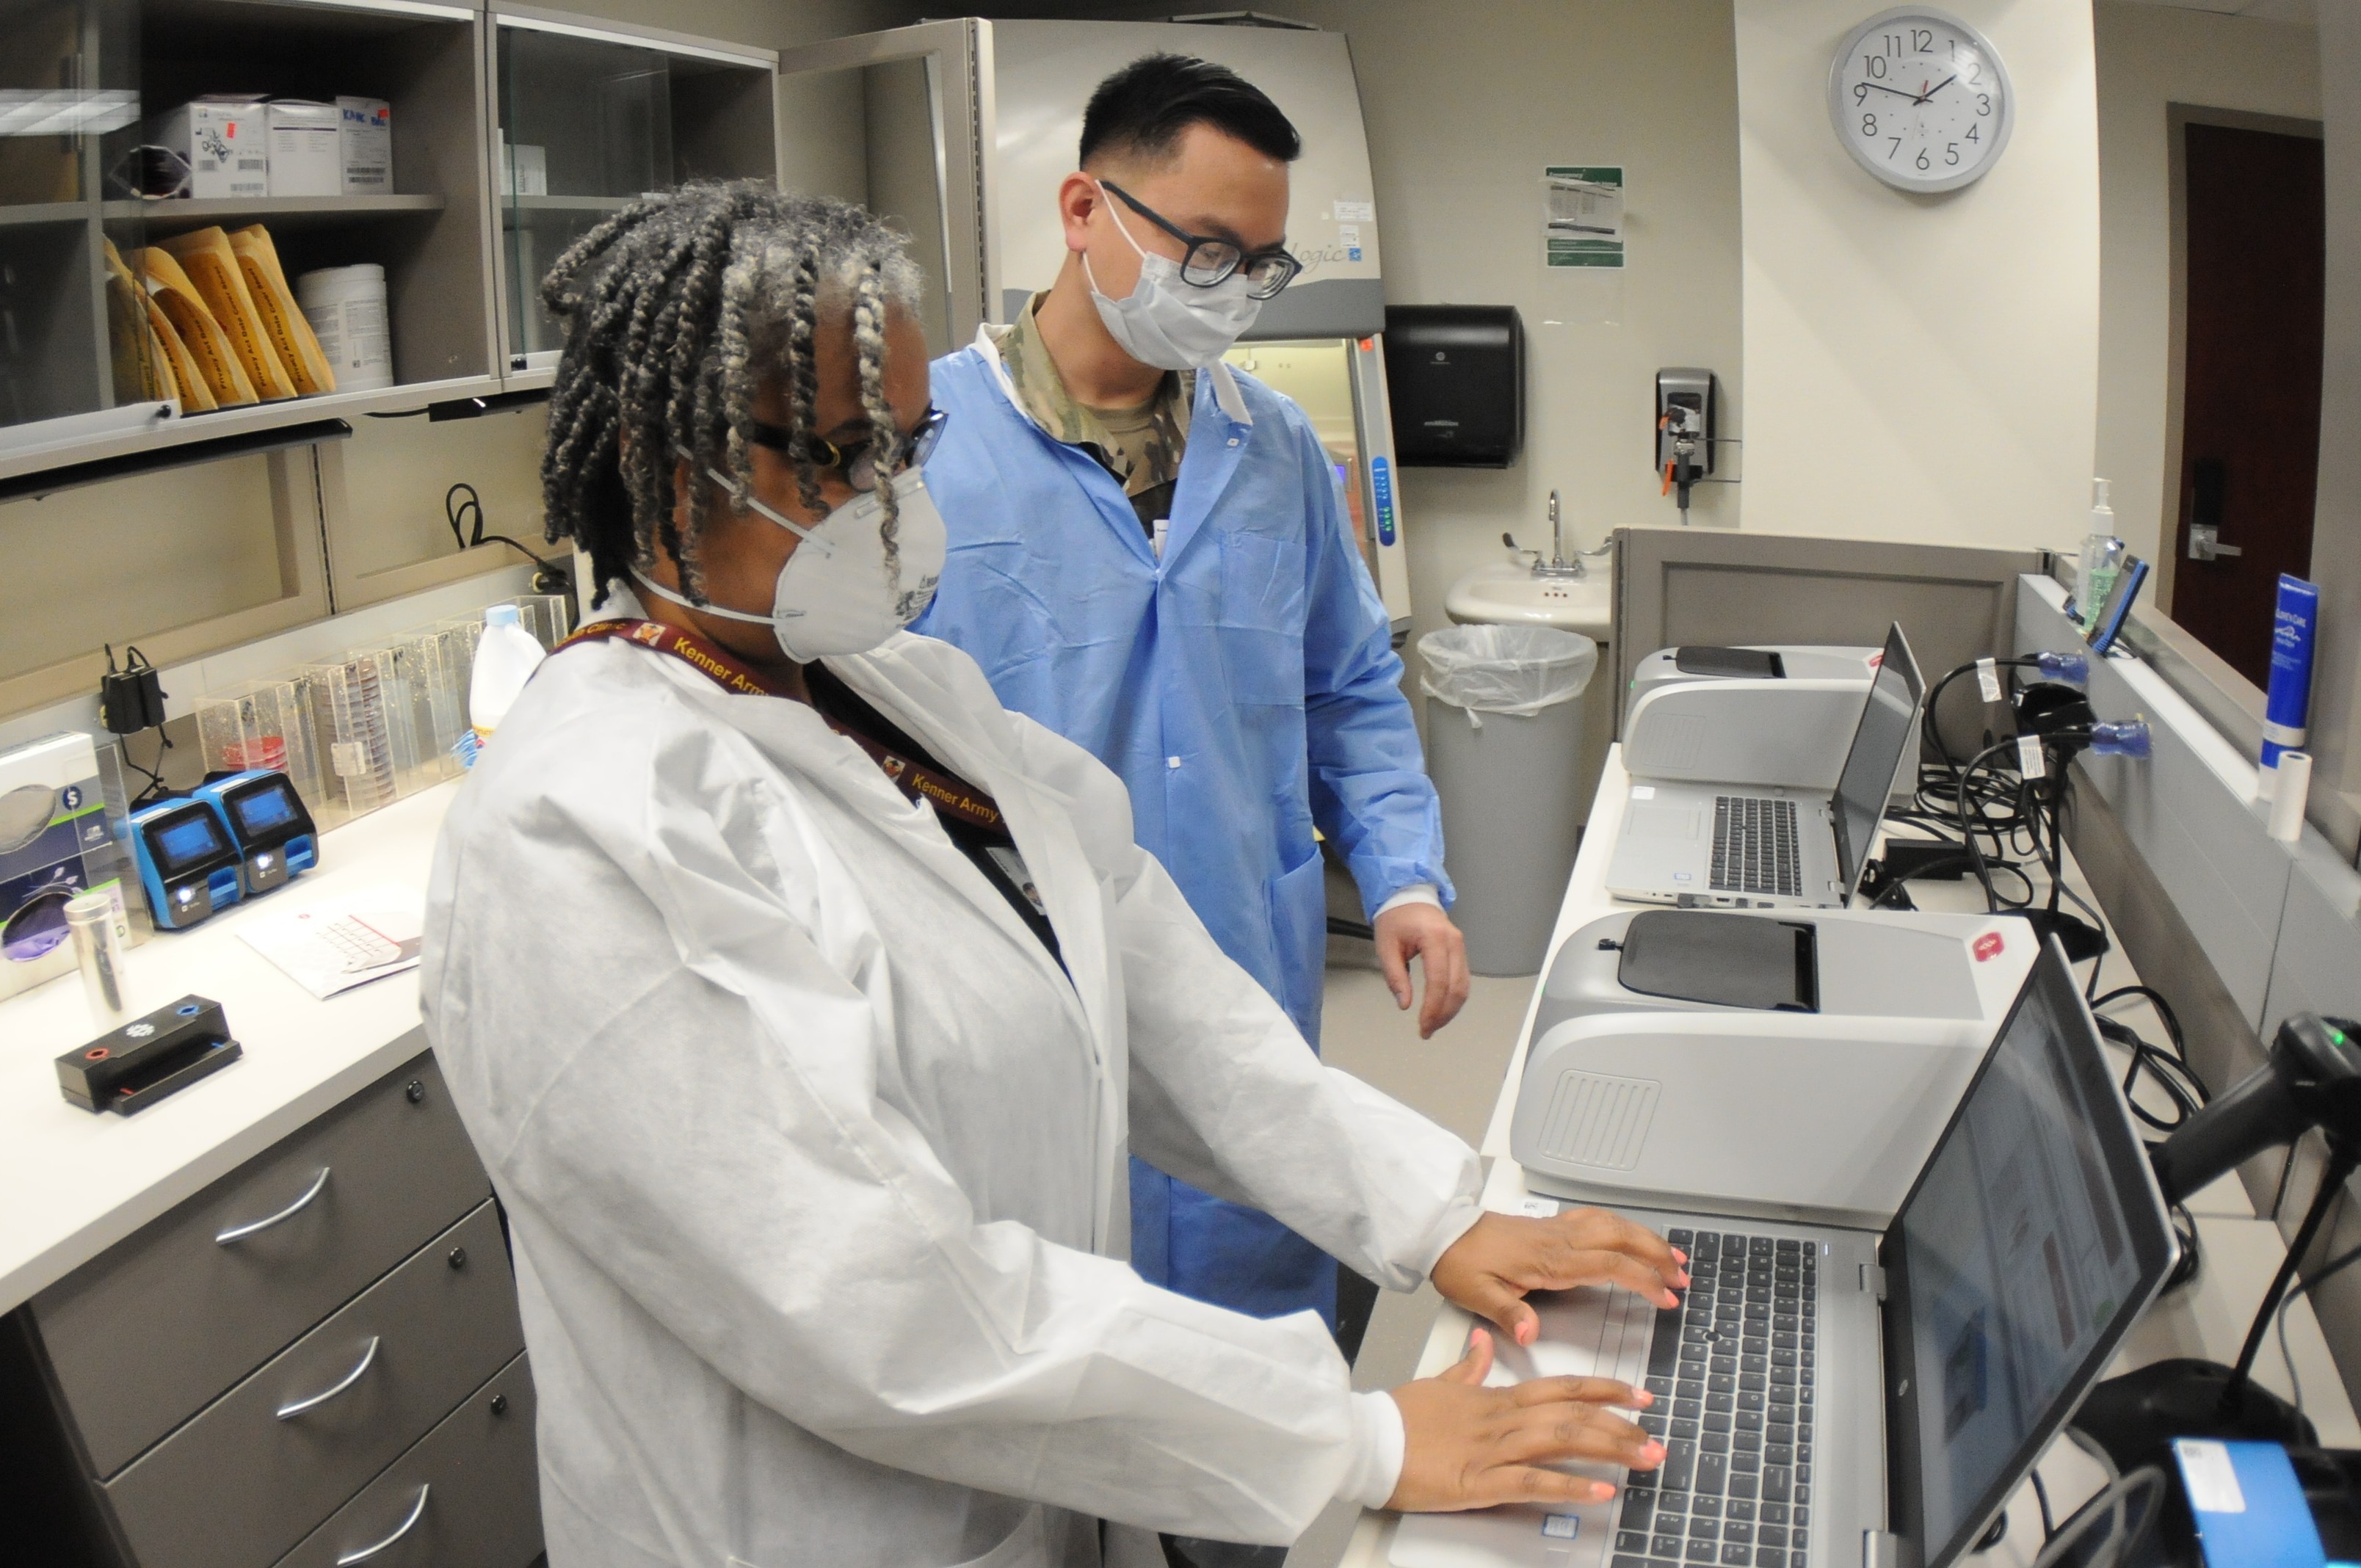 Lee clinic receives coronavirus test equipment but supplies limited |  Article | The United States Army